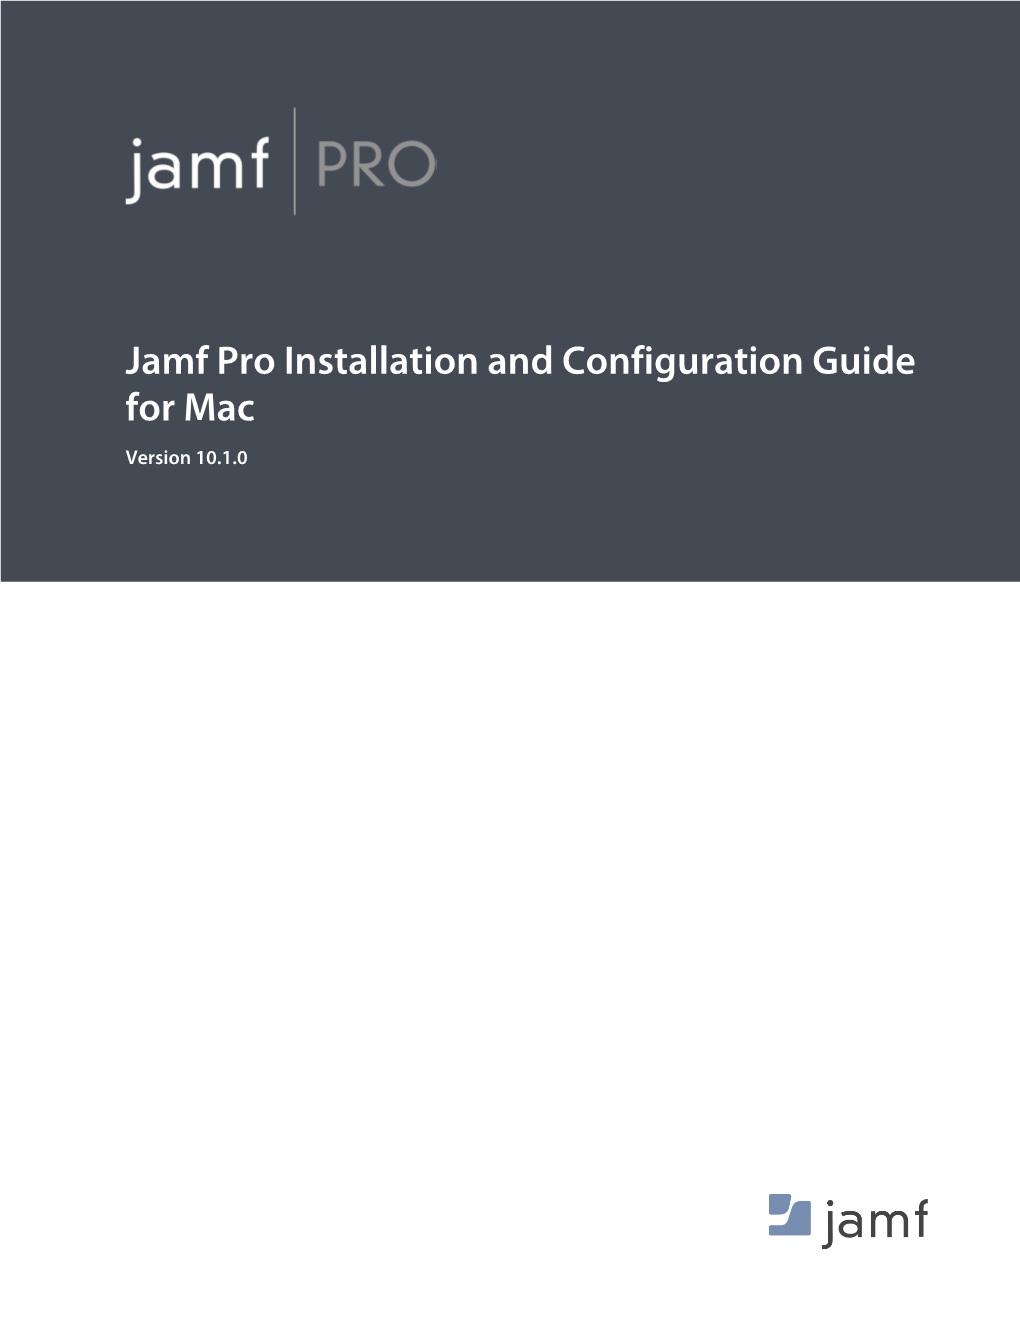 Jamf Pro Installation and Configuration Guide for Mac Version 10.1.0 © Copyright 2002-2017 Jamf